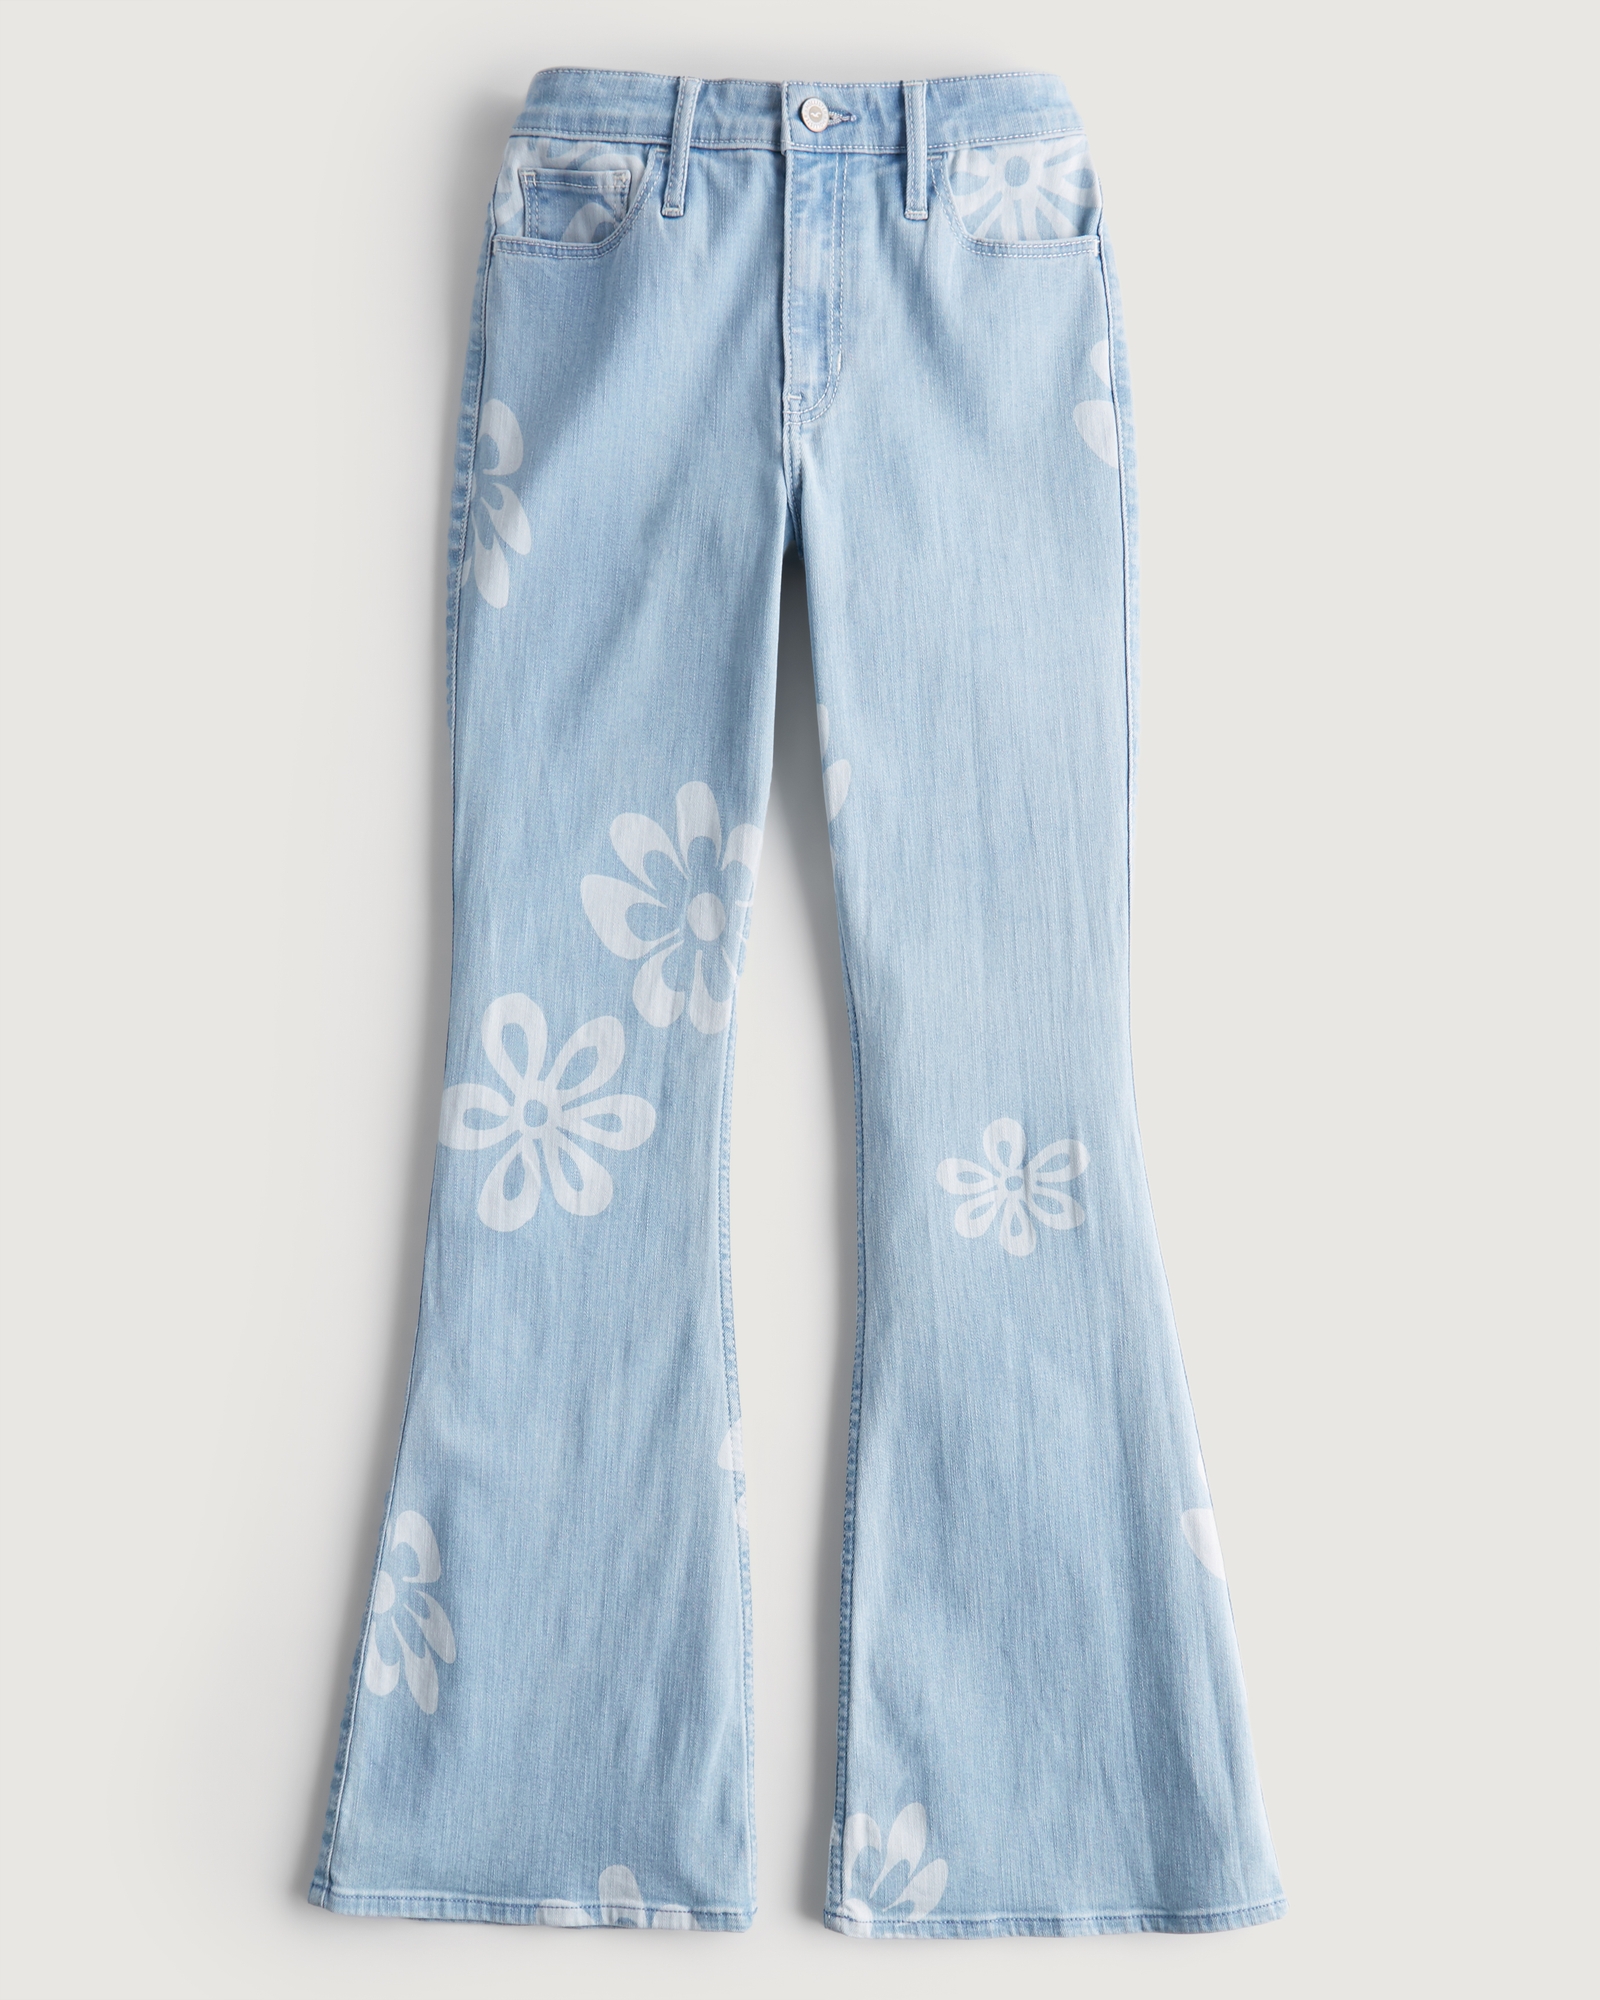 Hollister Flare Jeans for Sale in San Jose, CA - OfferUp